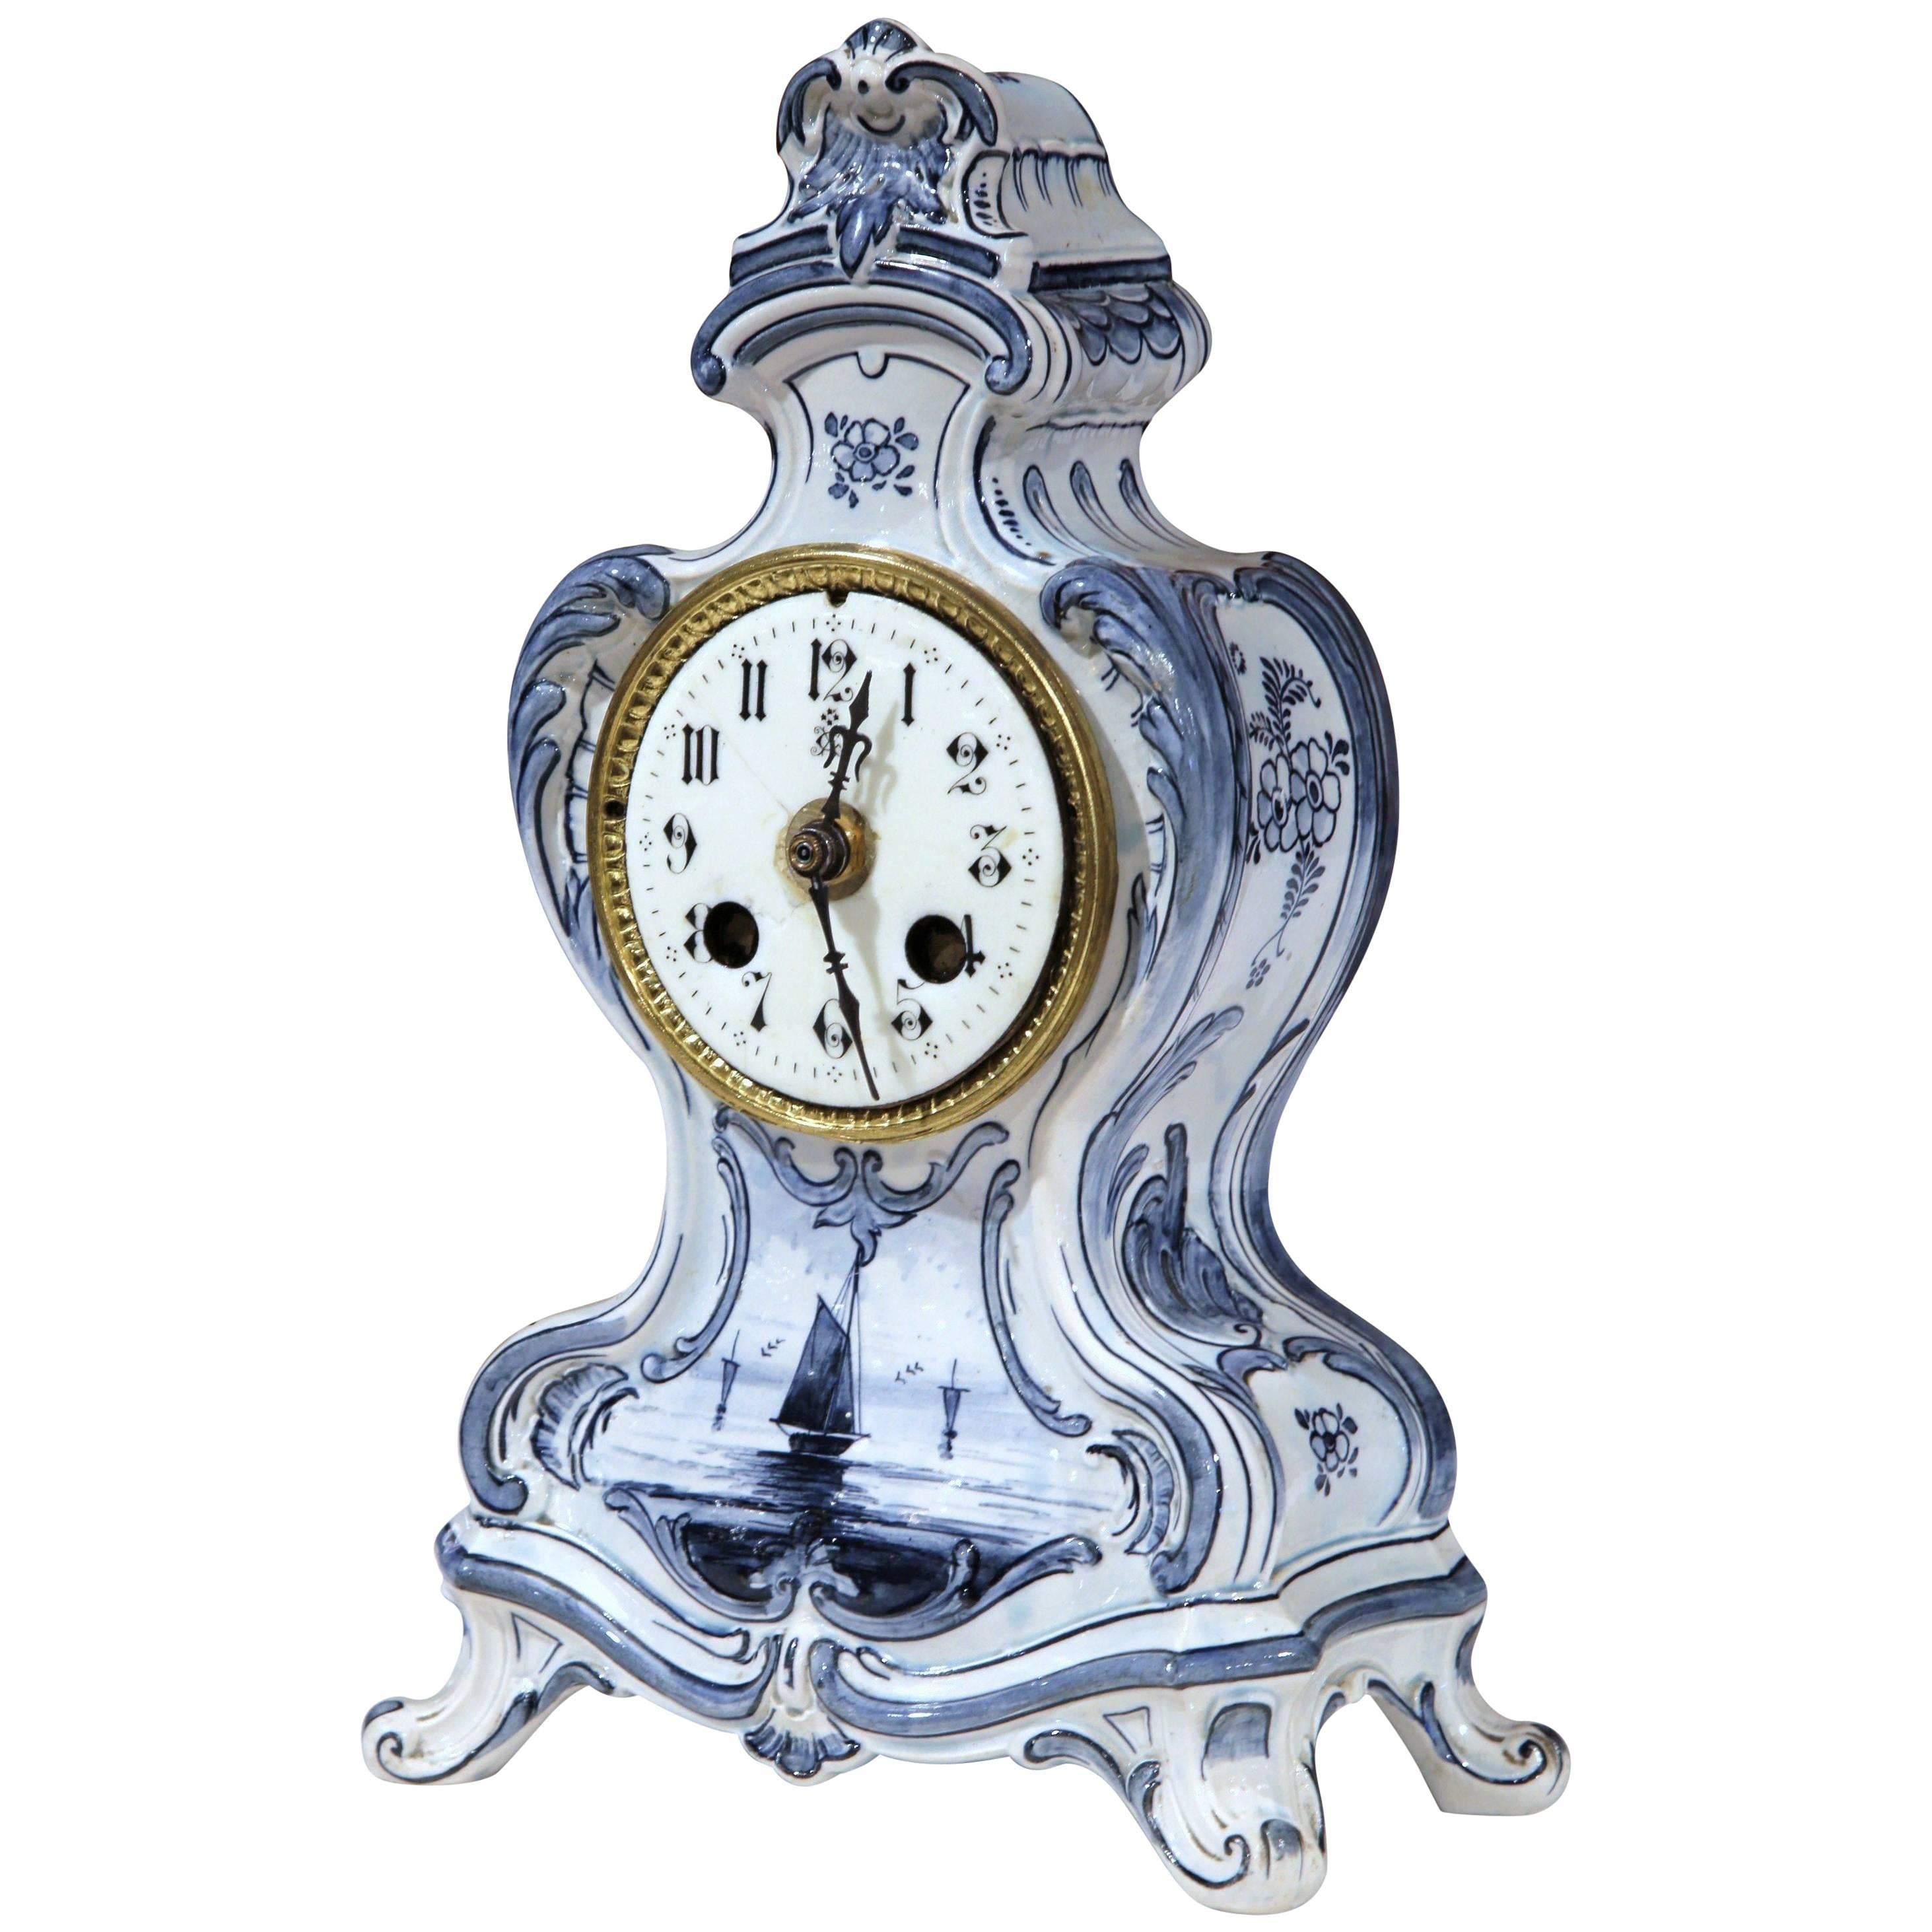 19th Century French Blue and White Hand-Painted Desk or Mantel Delft Clock